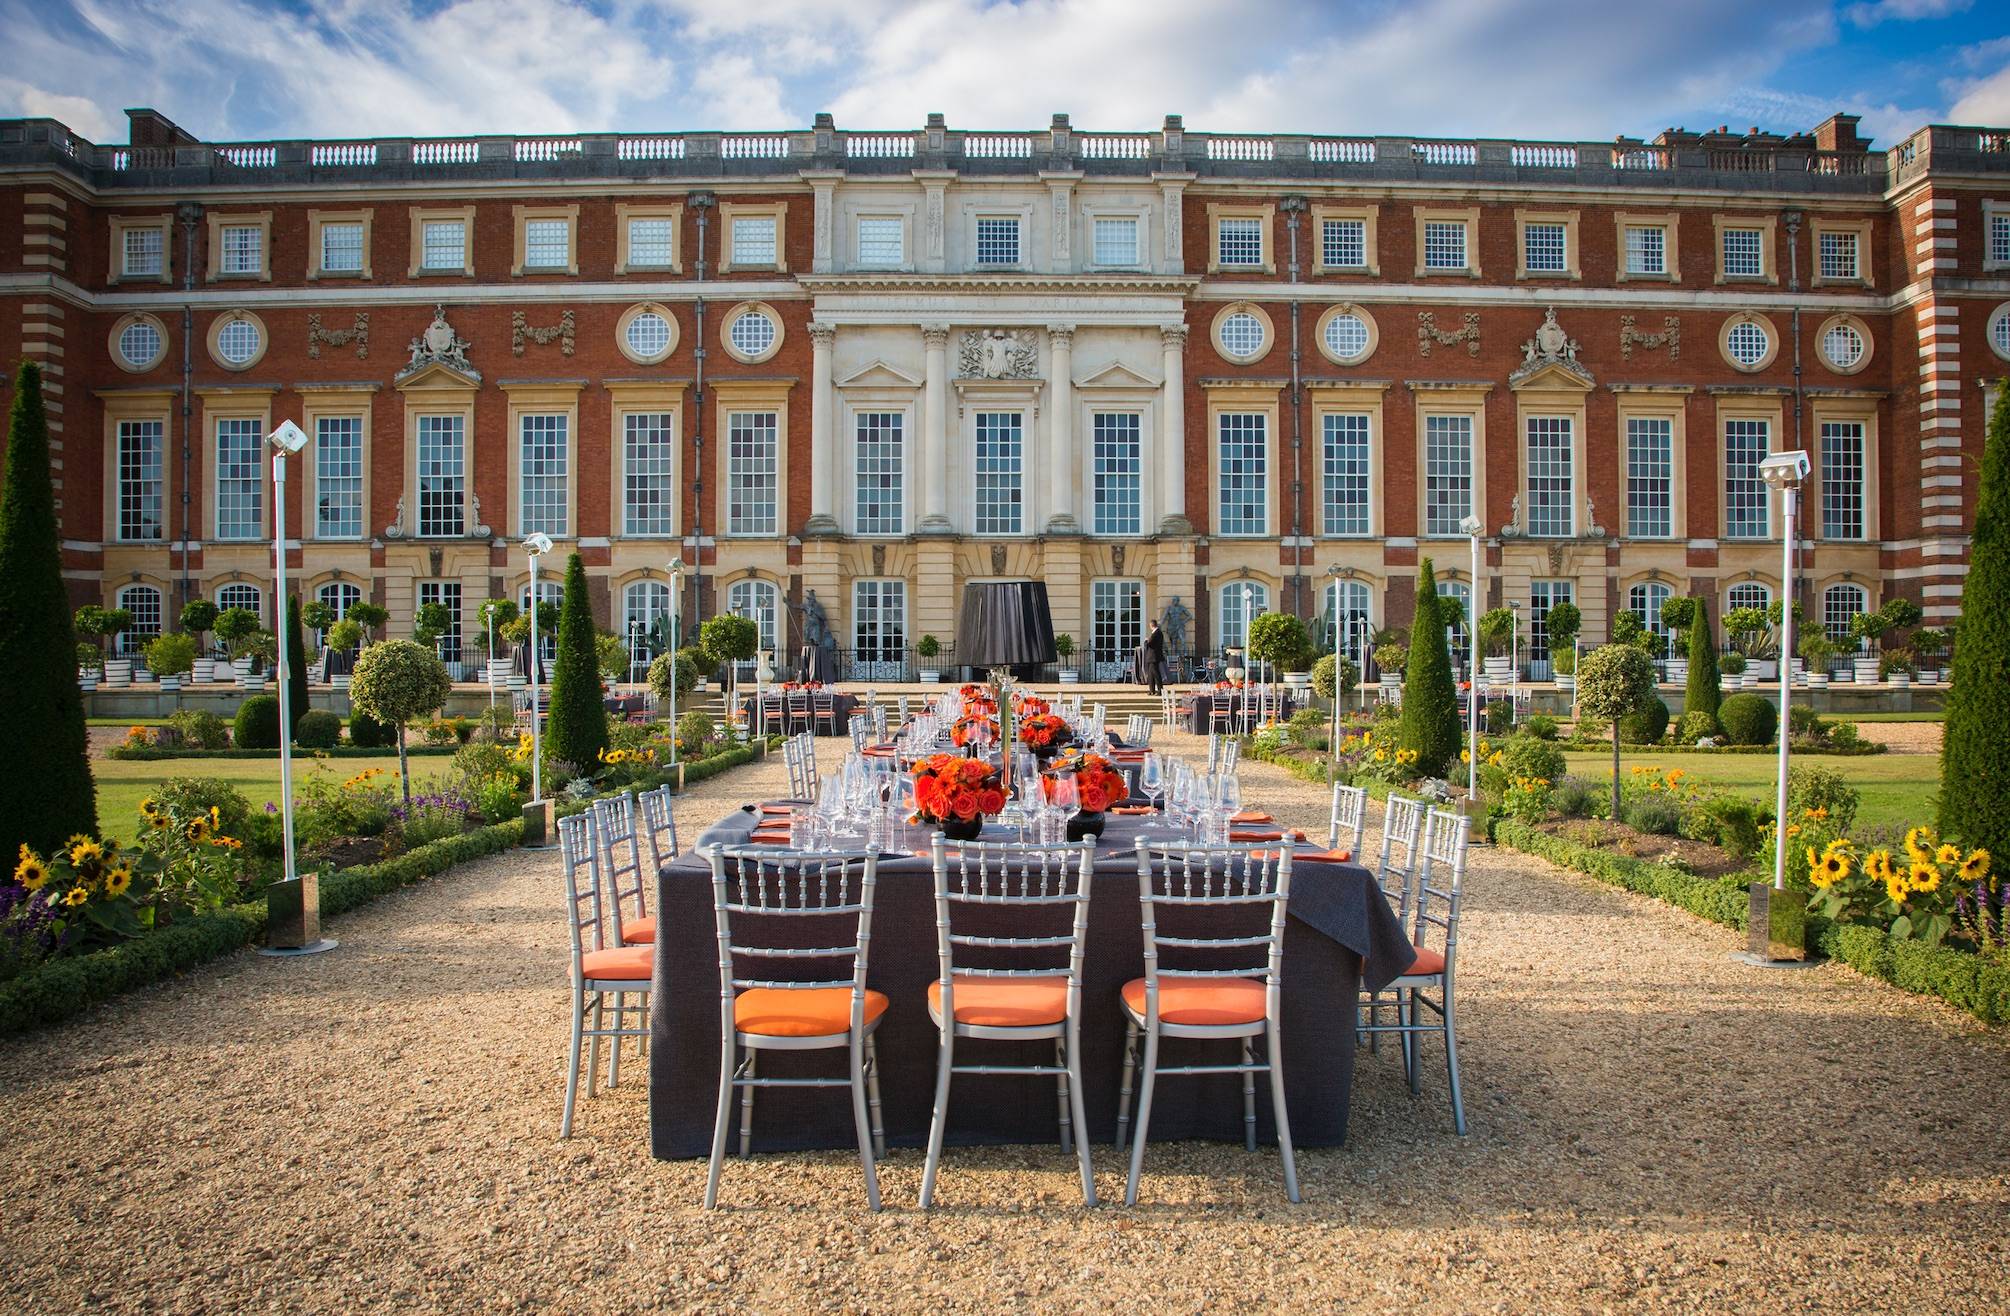 Garden soiree London, London garden party, events at Hampton Court Palace, party planner london, party in a palace